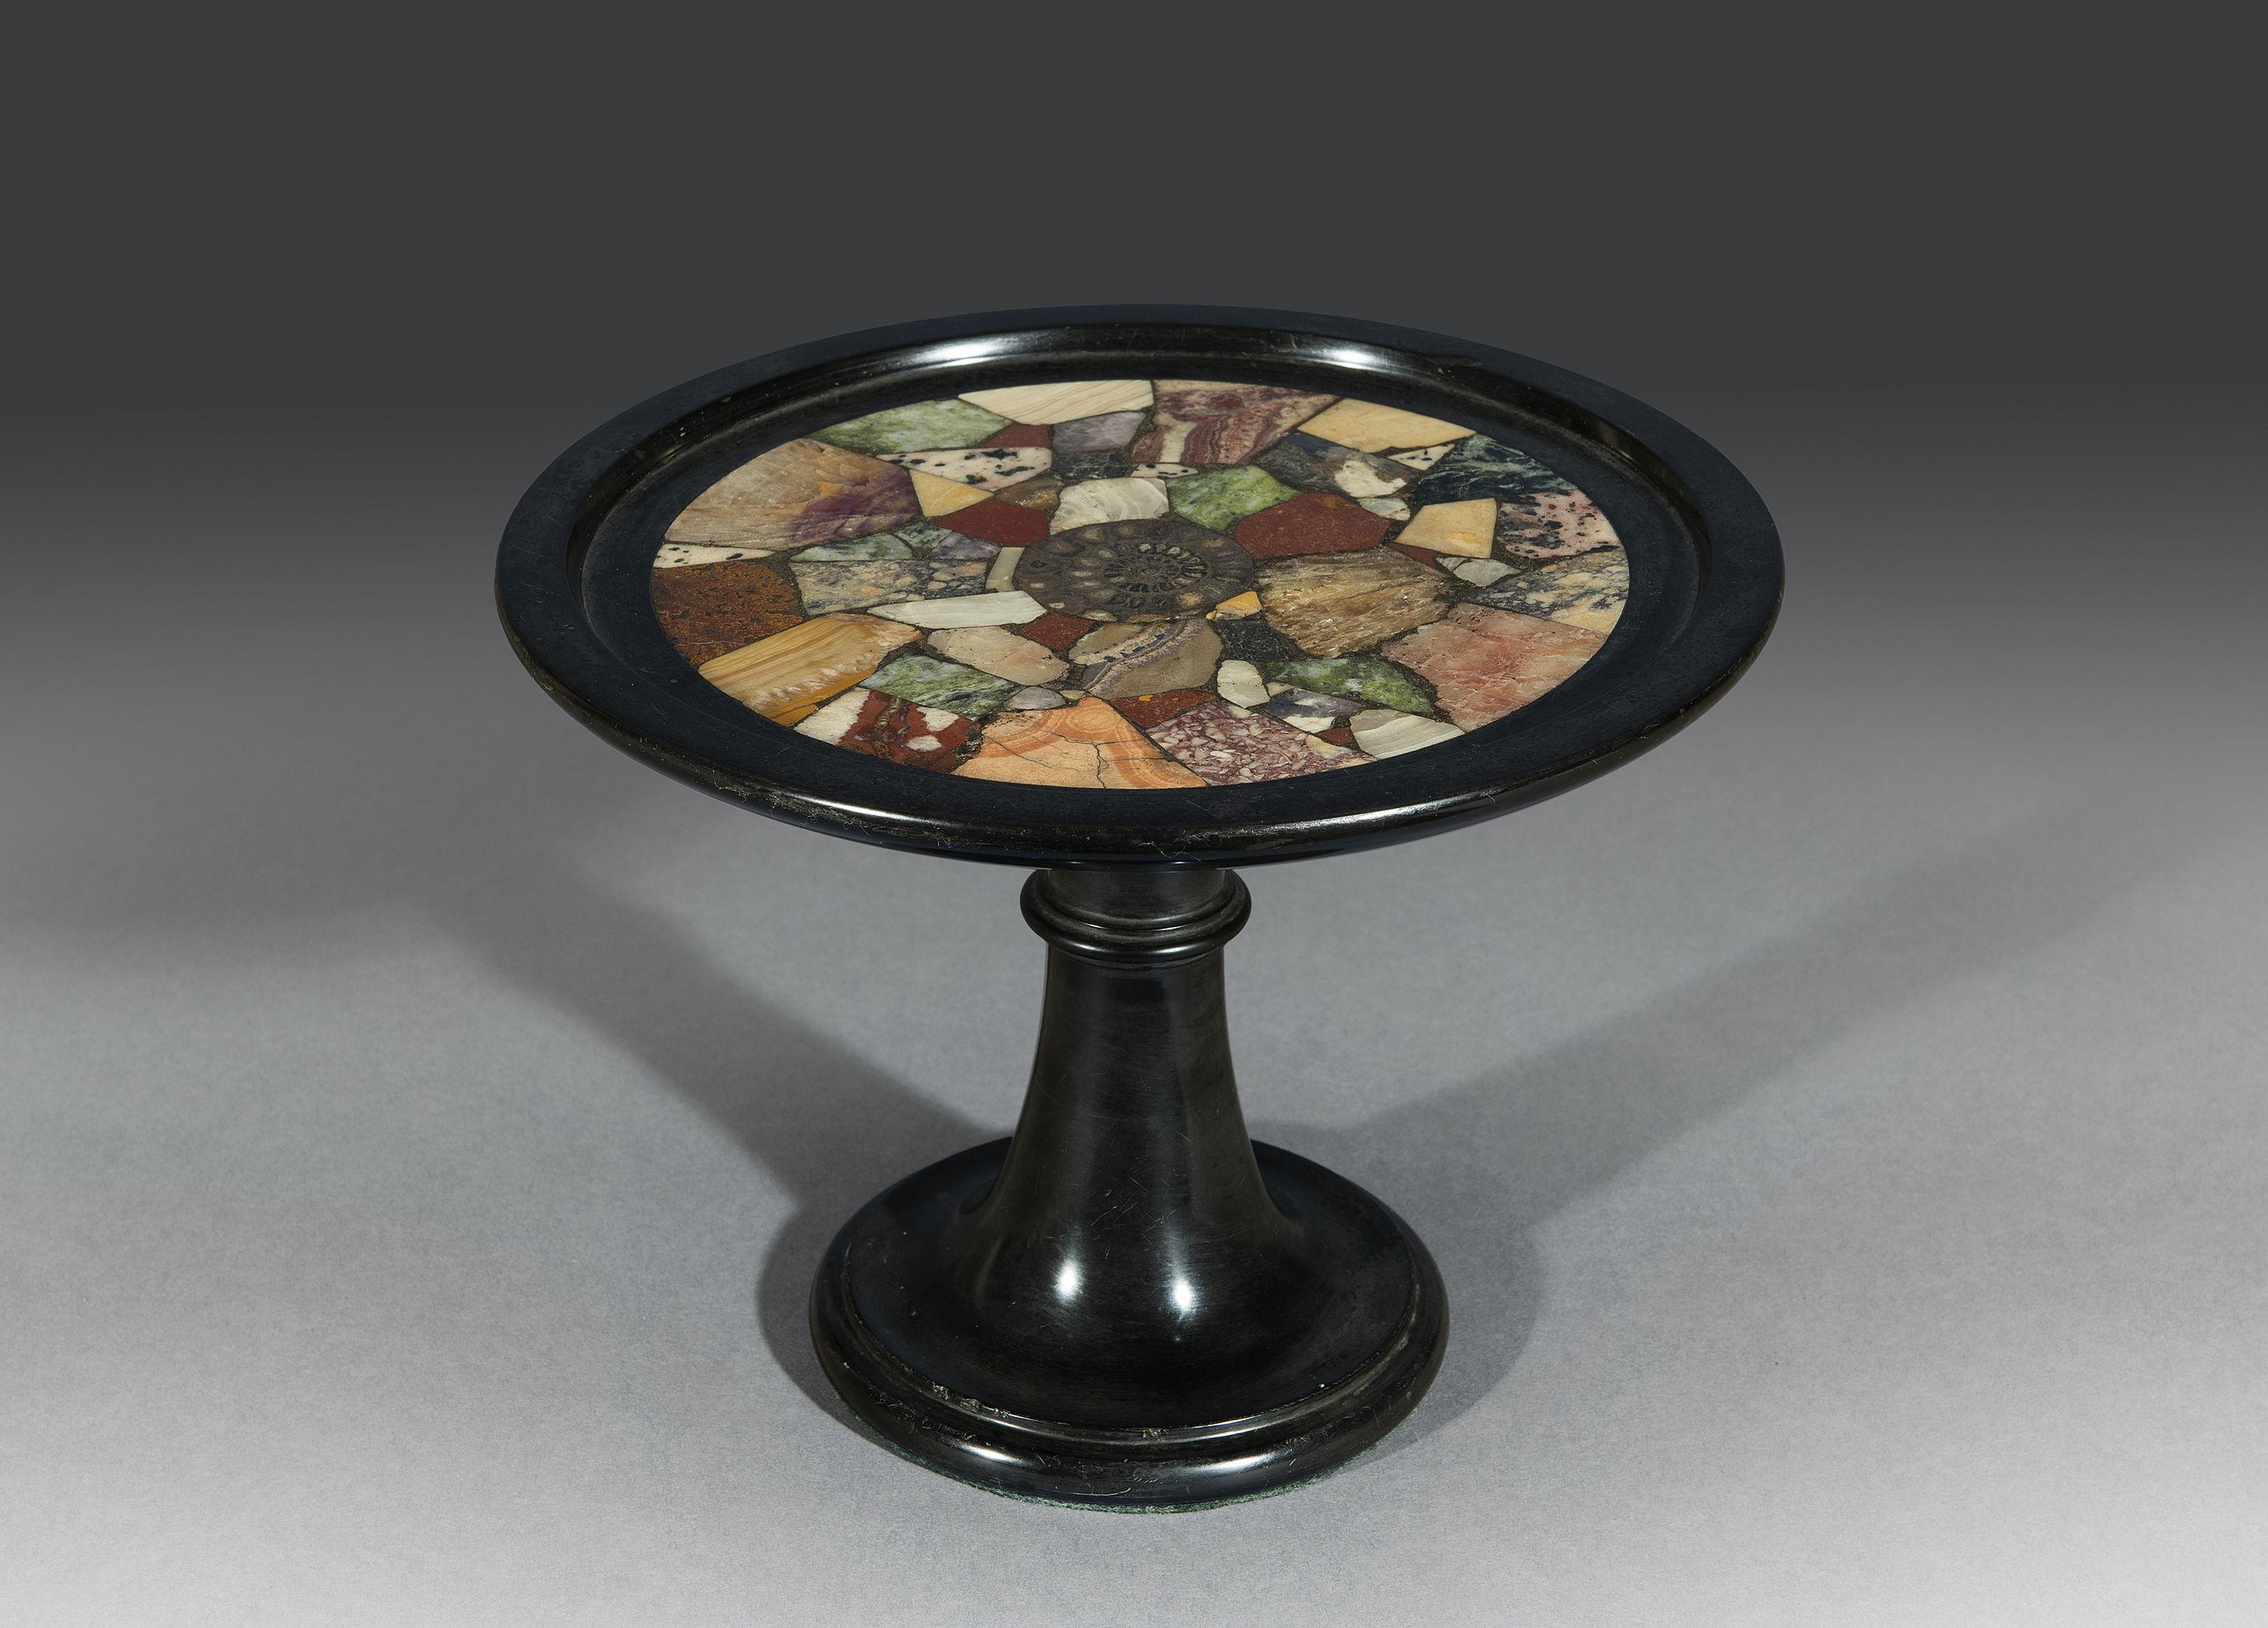 The shallow Belgian granite dish is inlaid with various marble specimens that surround an Ammonite fossil. The dish sits on a ring turned column and socle. 

N.B. 

Belgian Granite comes from the area of Soignies in Belgium and its appearance is